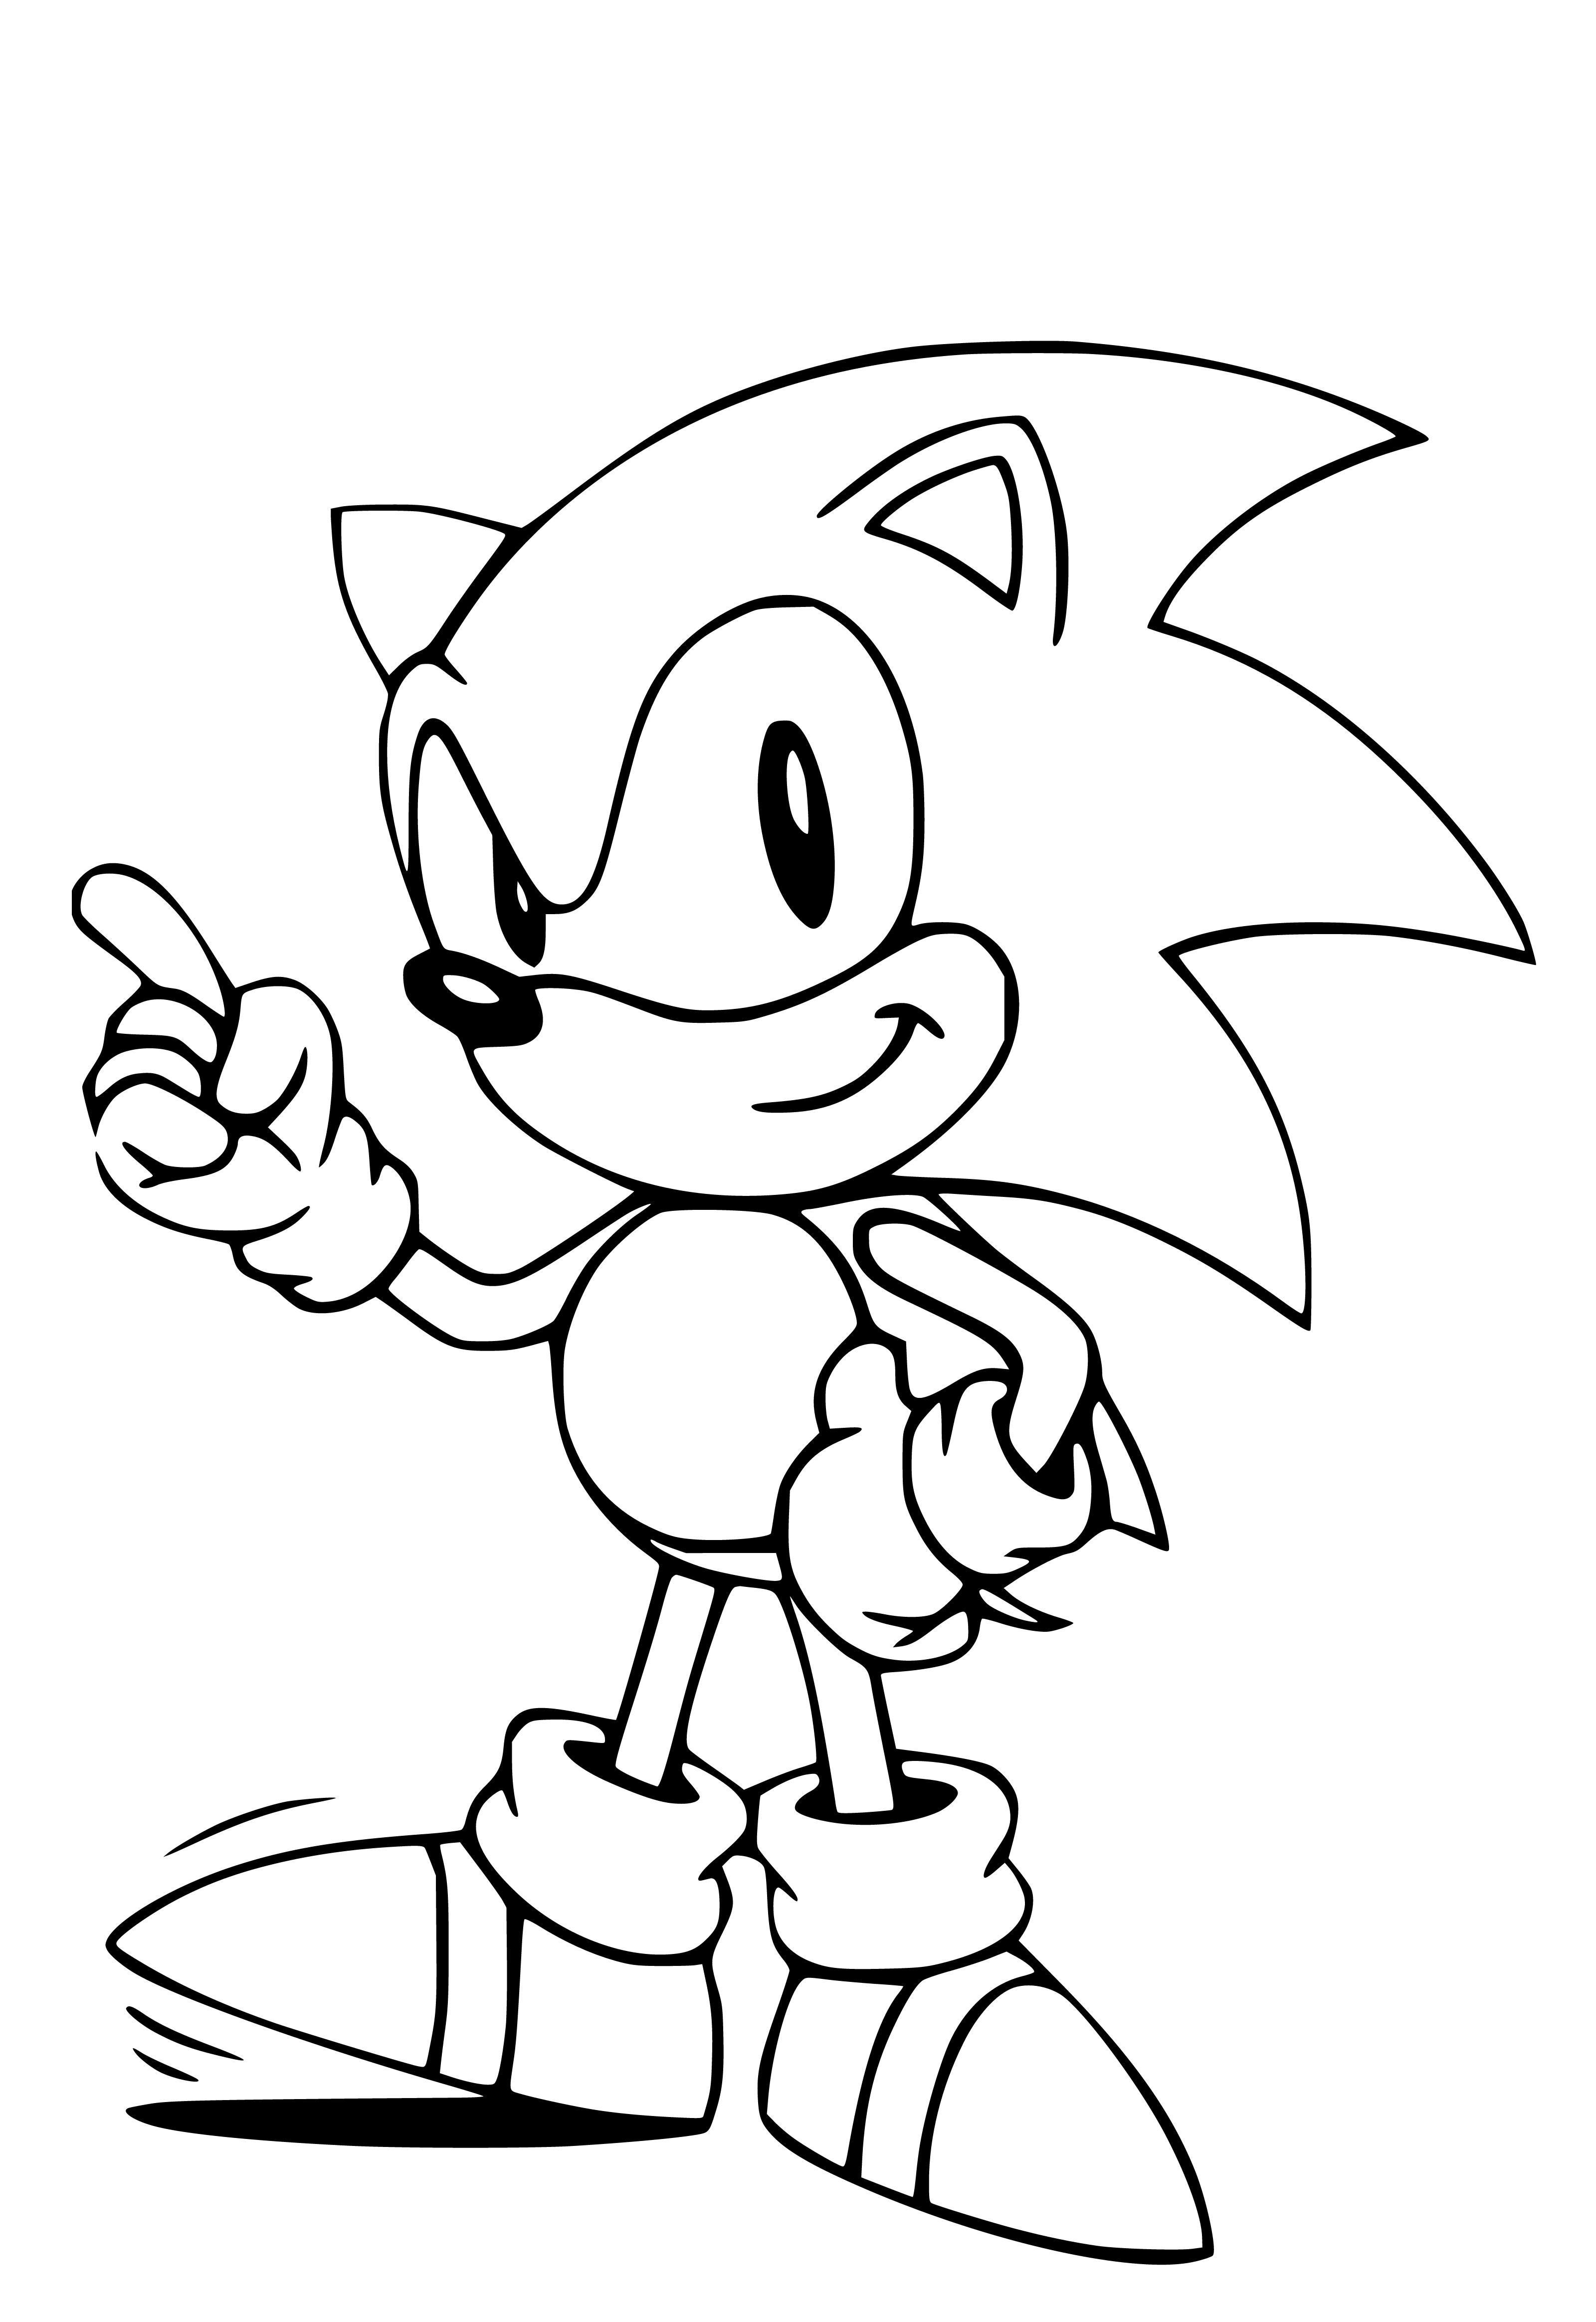 Printable Cute Sonic sketching Coloring Page for kids.